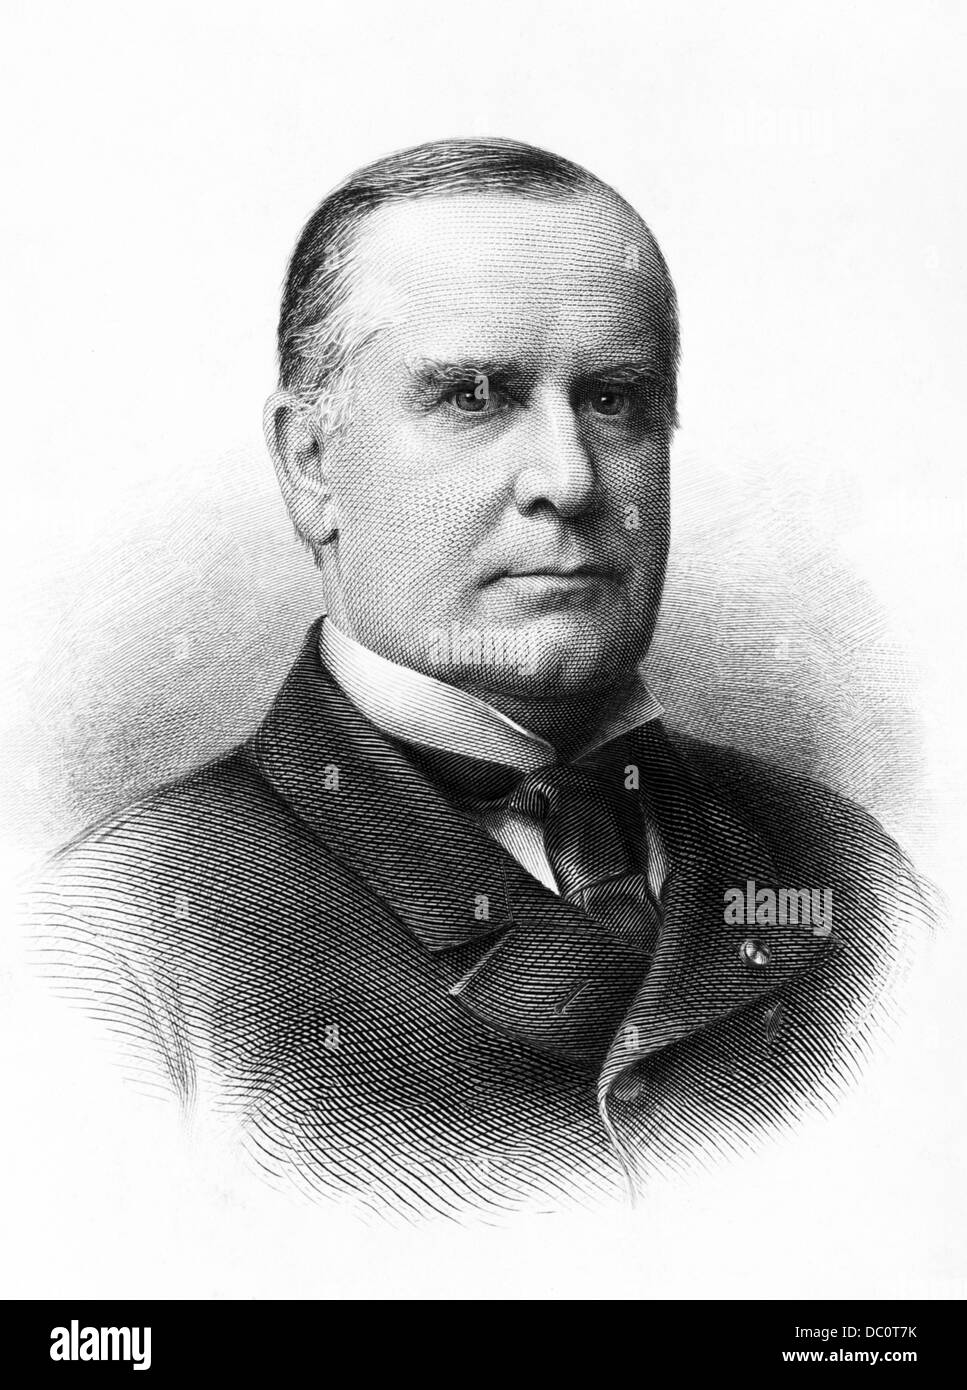 1890s 1900s PORTRAIT OF WILLIAM MCKINLEY LOOKING AT CAMERA 25TH PRESIDENT OF THE UNTED STATES KILLED BY ASSASSIN'S BULLET 1901 Stock Photo